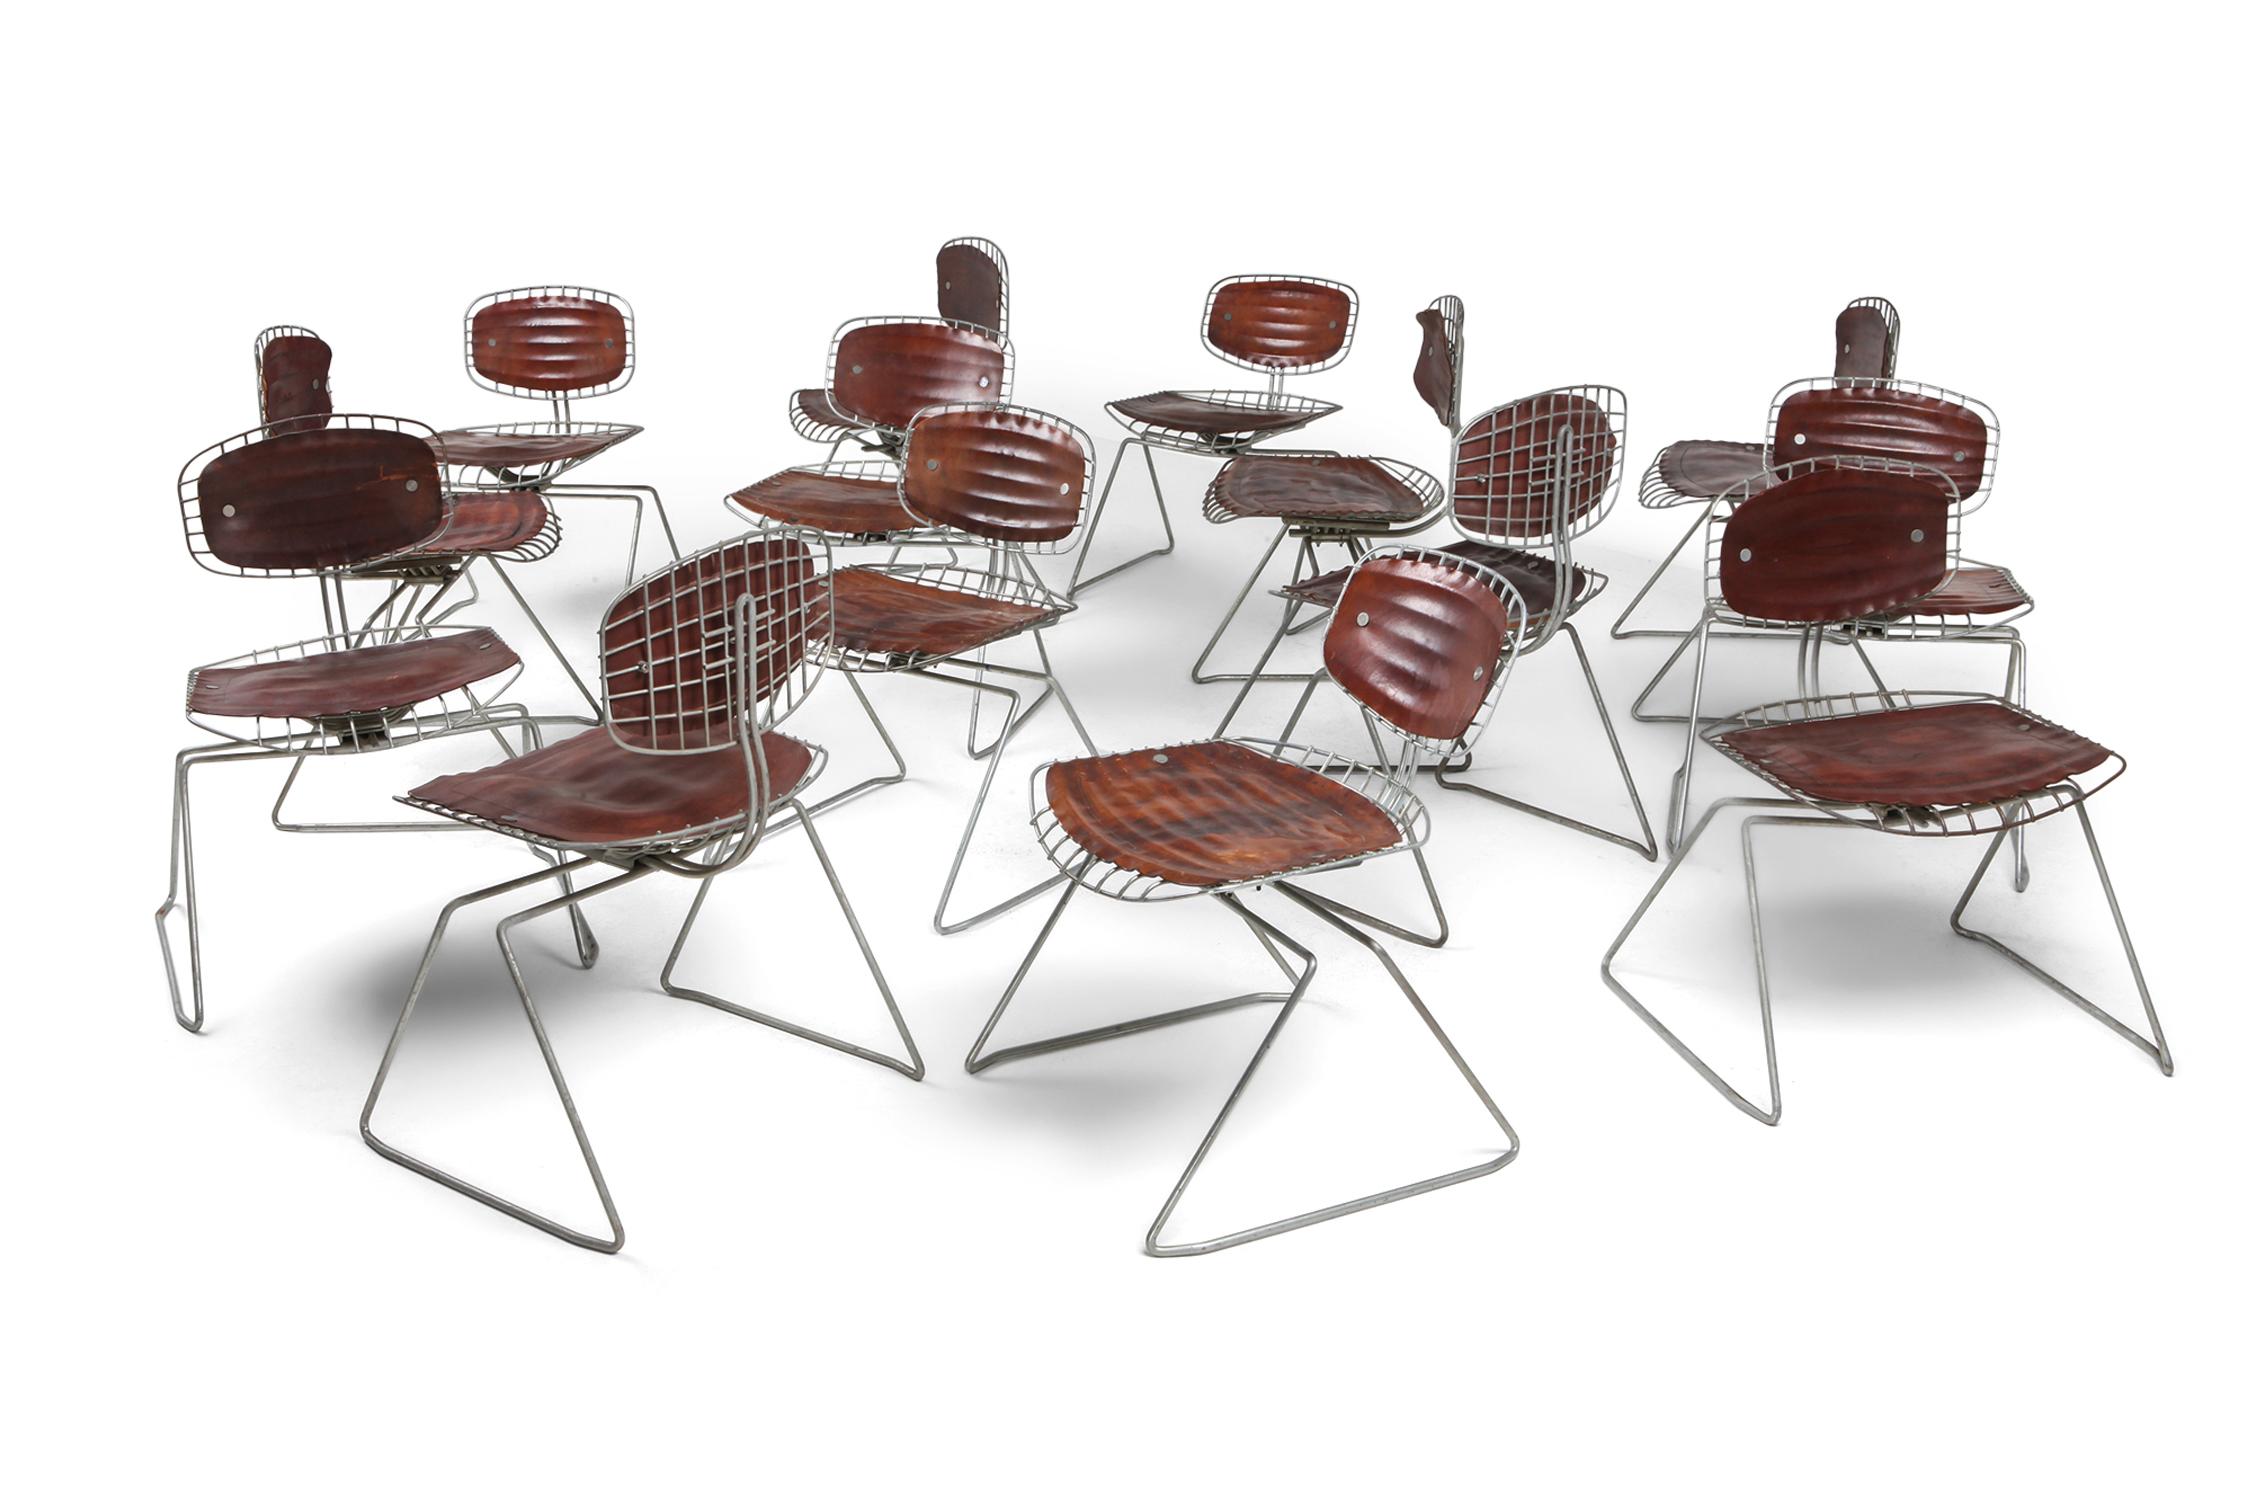 Steel Centre Pompidou Beauburg Chairs Selected by Jean Prouvé